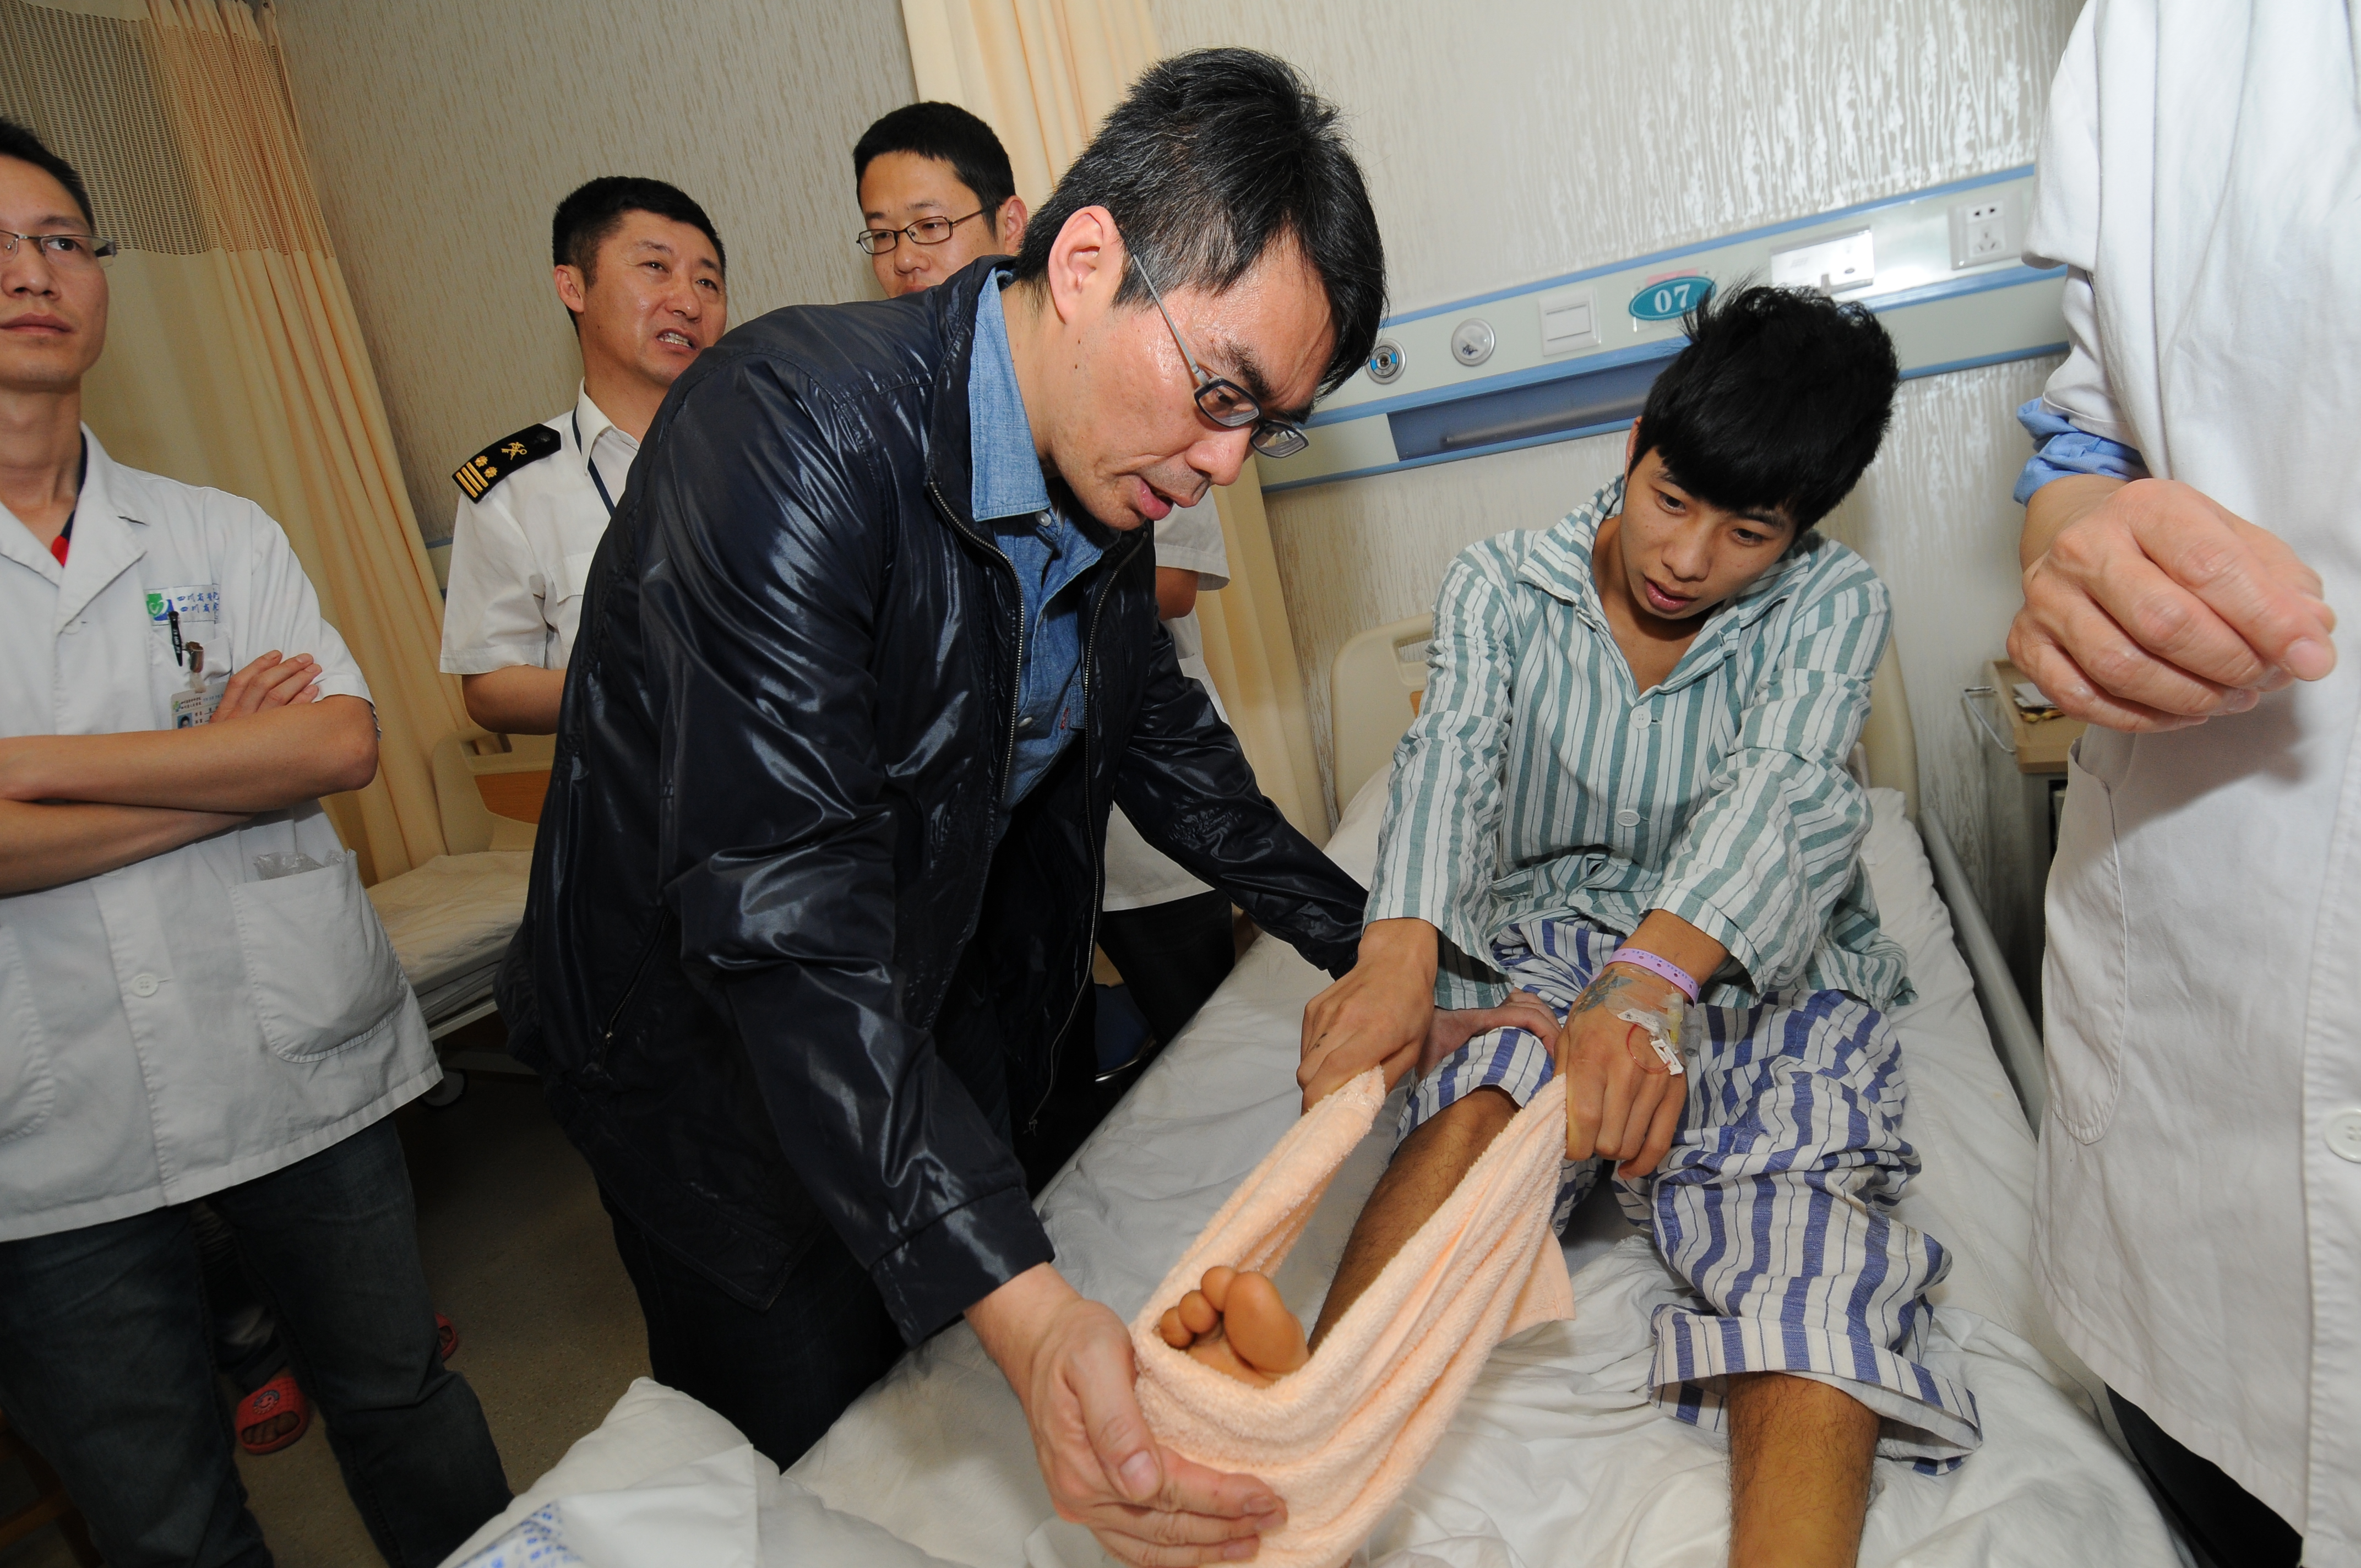 Dr. LAW Sheung Wai introduced prothesis to amputees of Sichuan earthquake